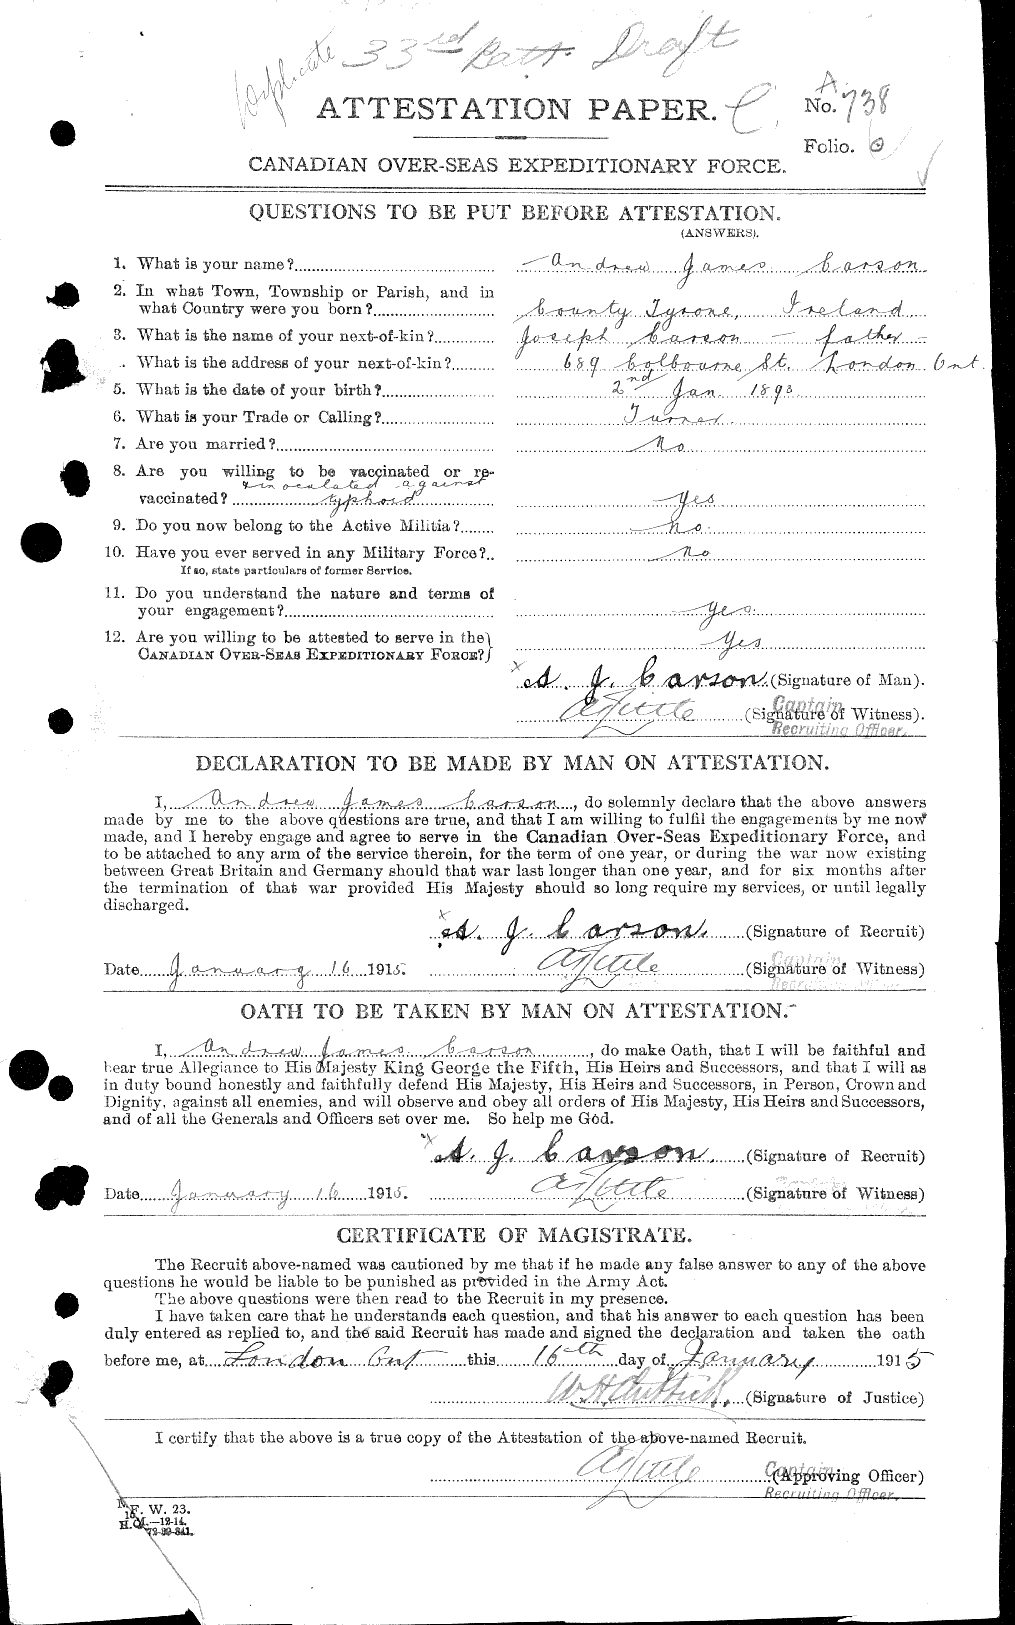 Personnel Records of the First World War - CEF 005820a